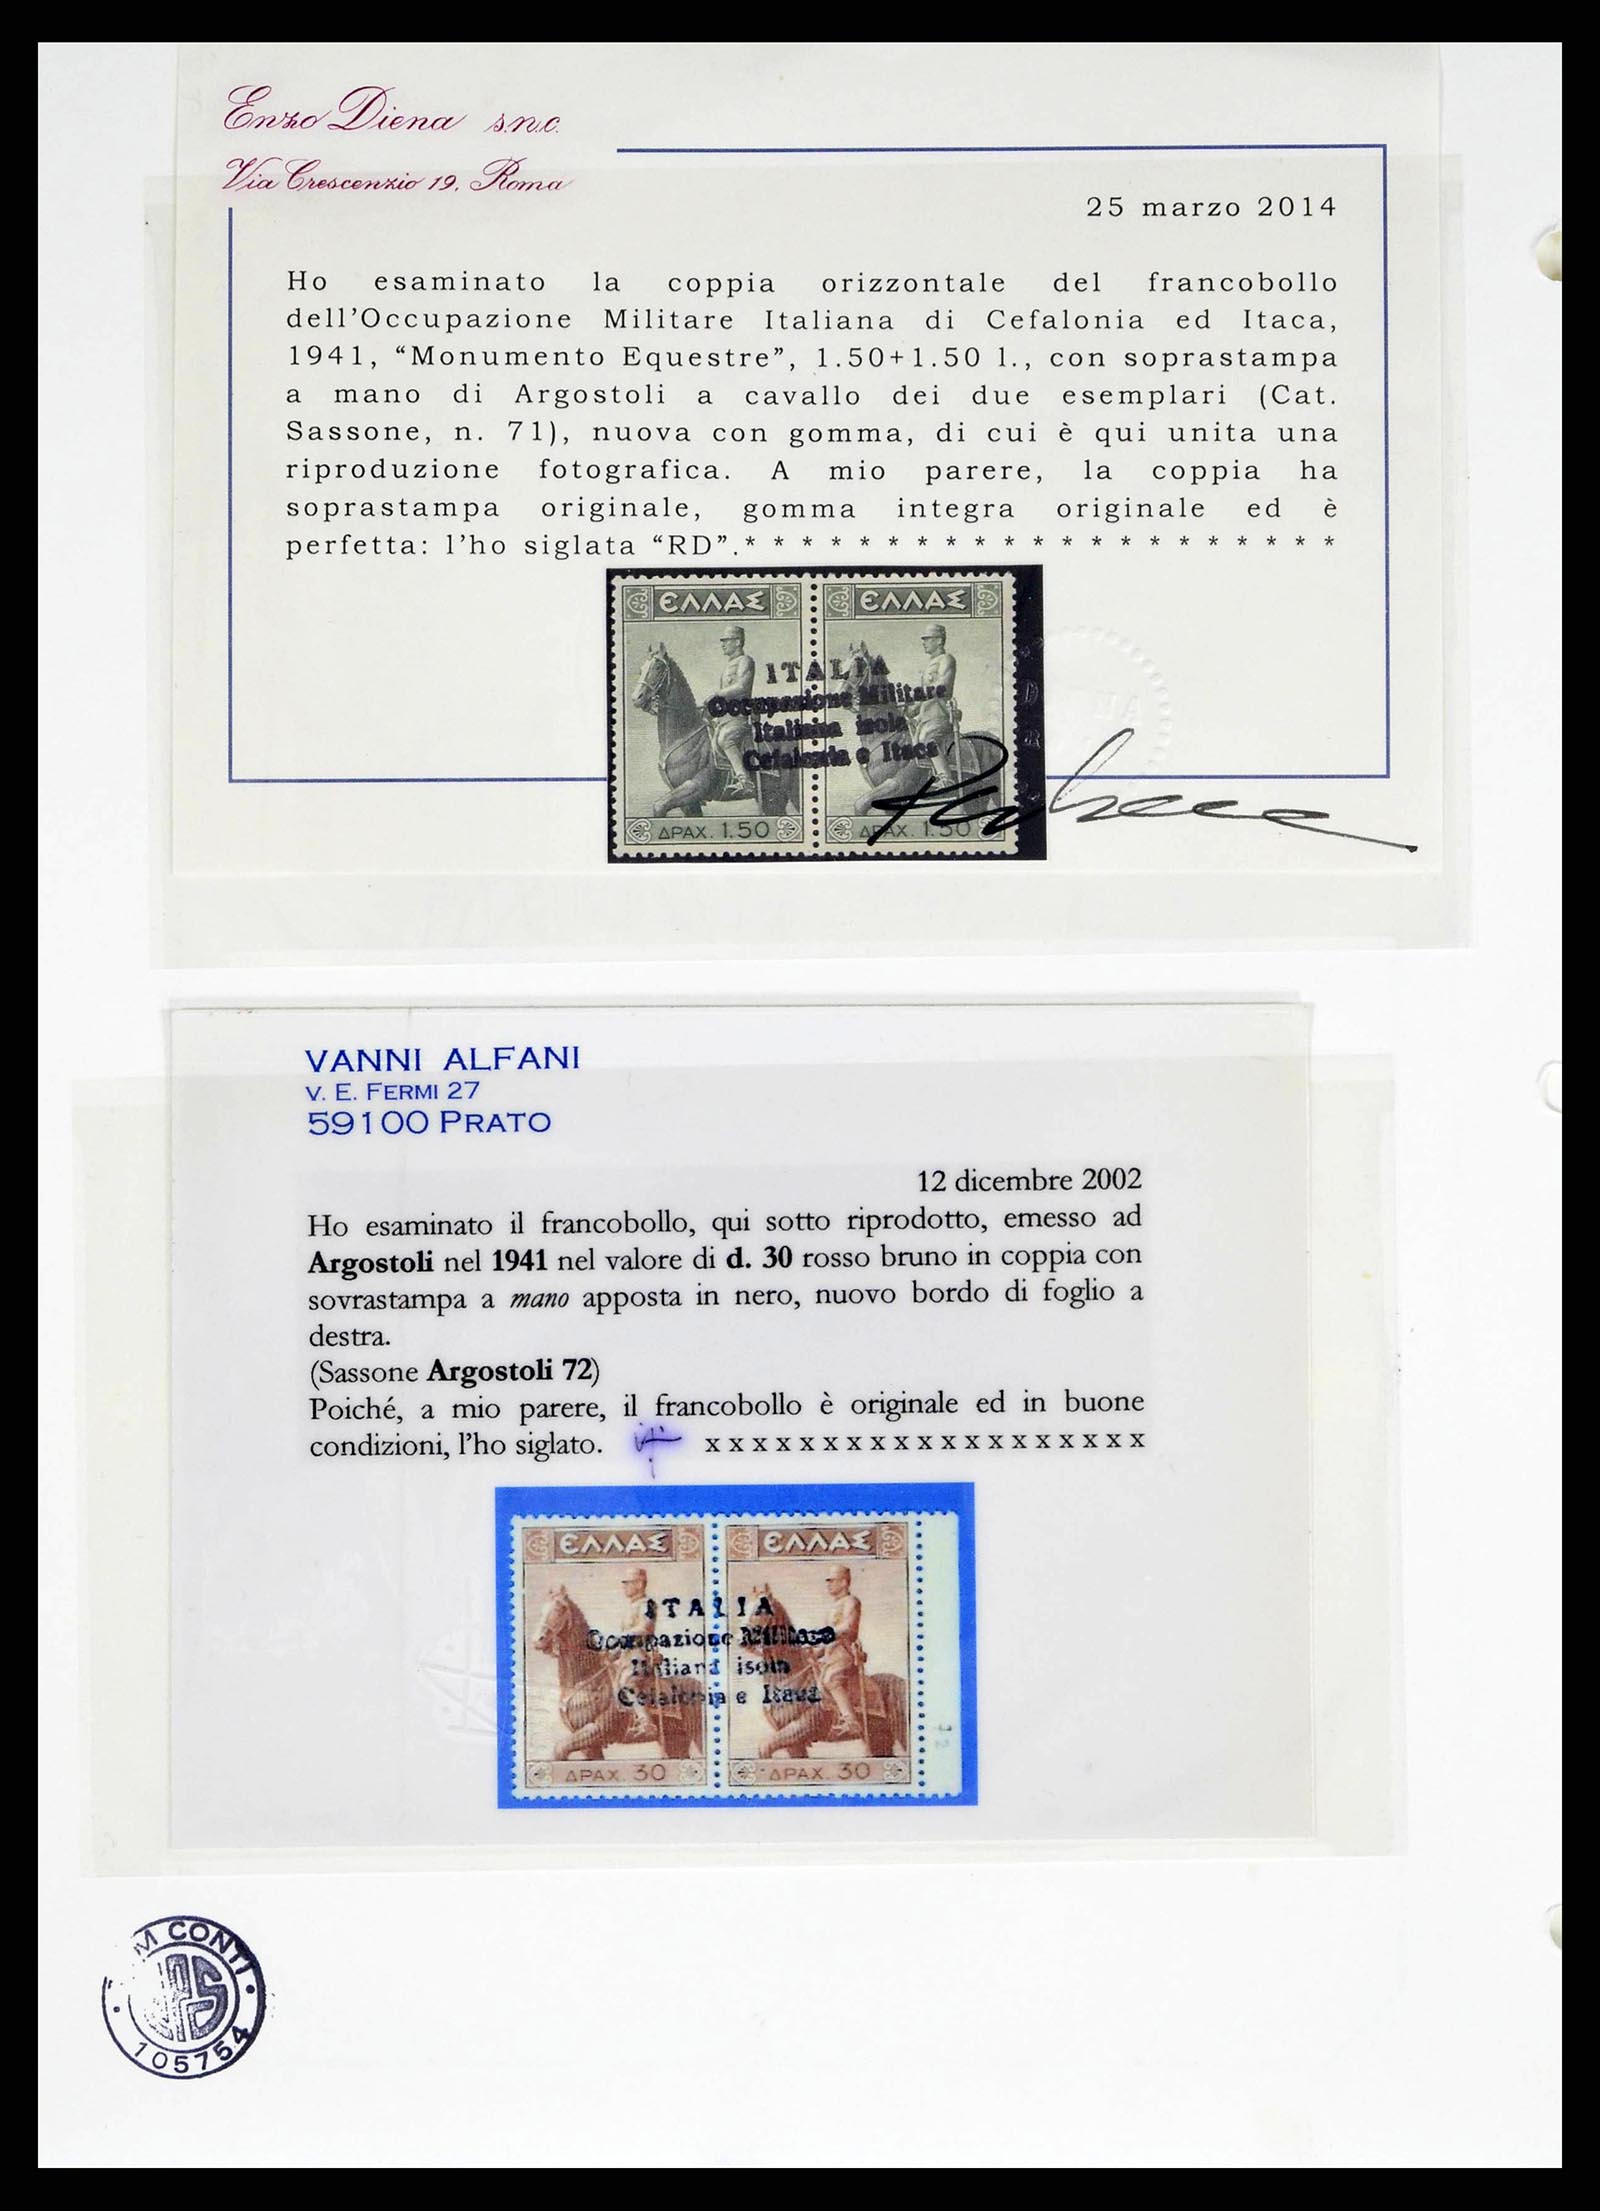 38989 0011 - Stamp collection 38989 Italian occupation Cefalonia and Itaca 1941.